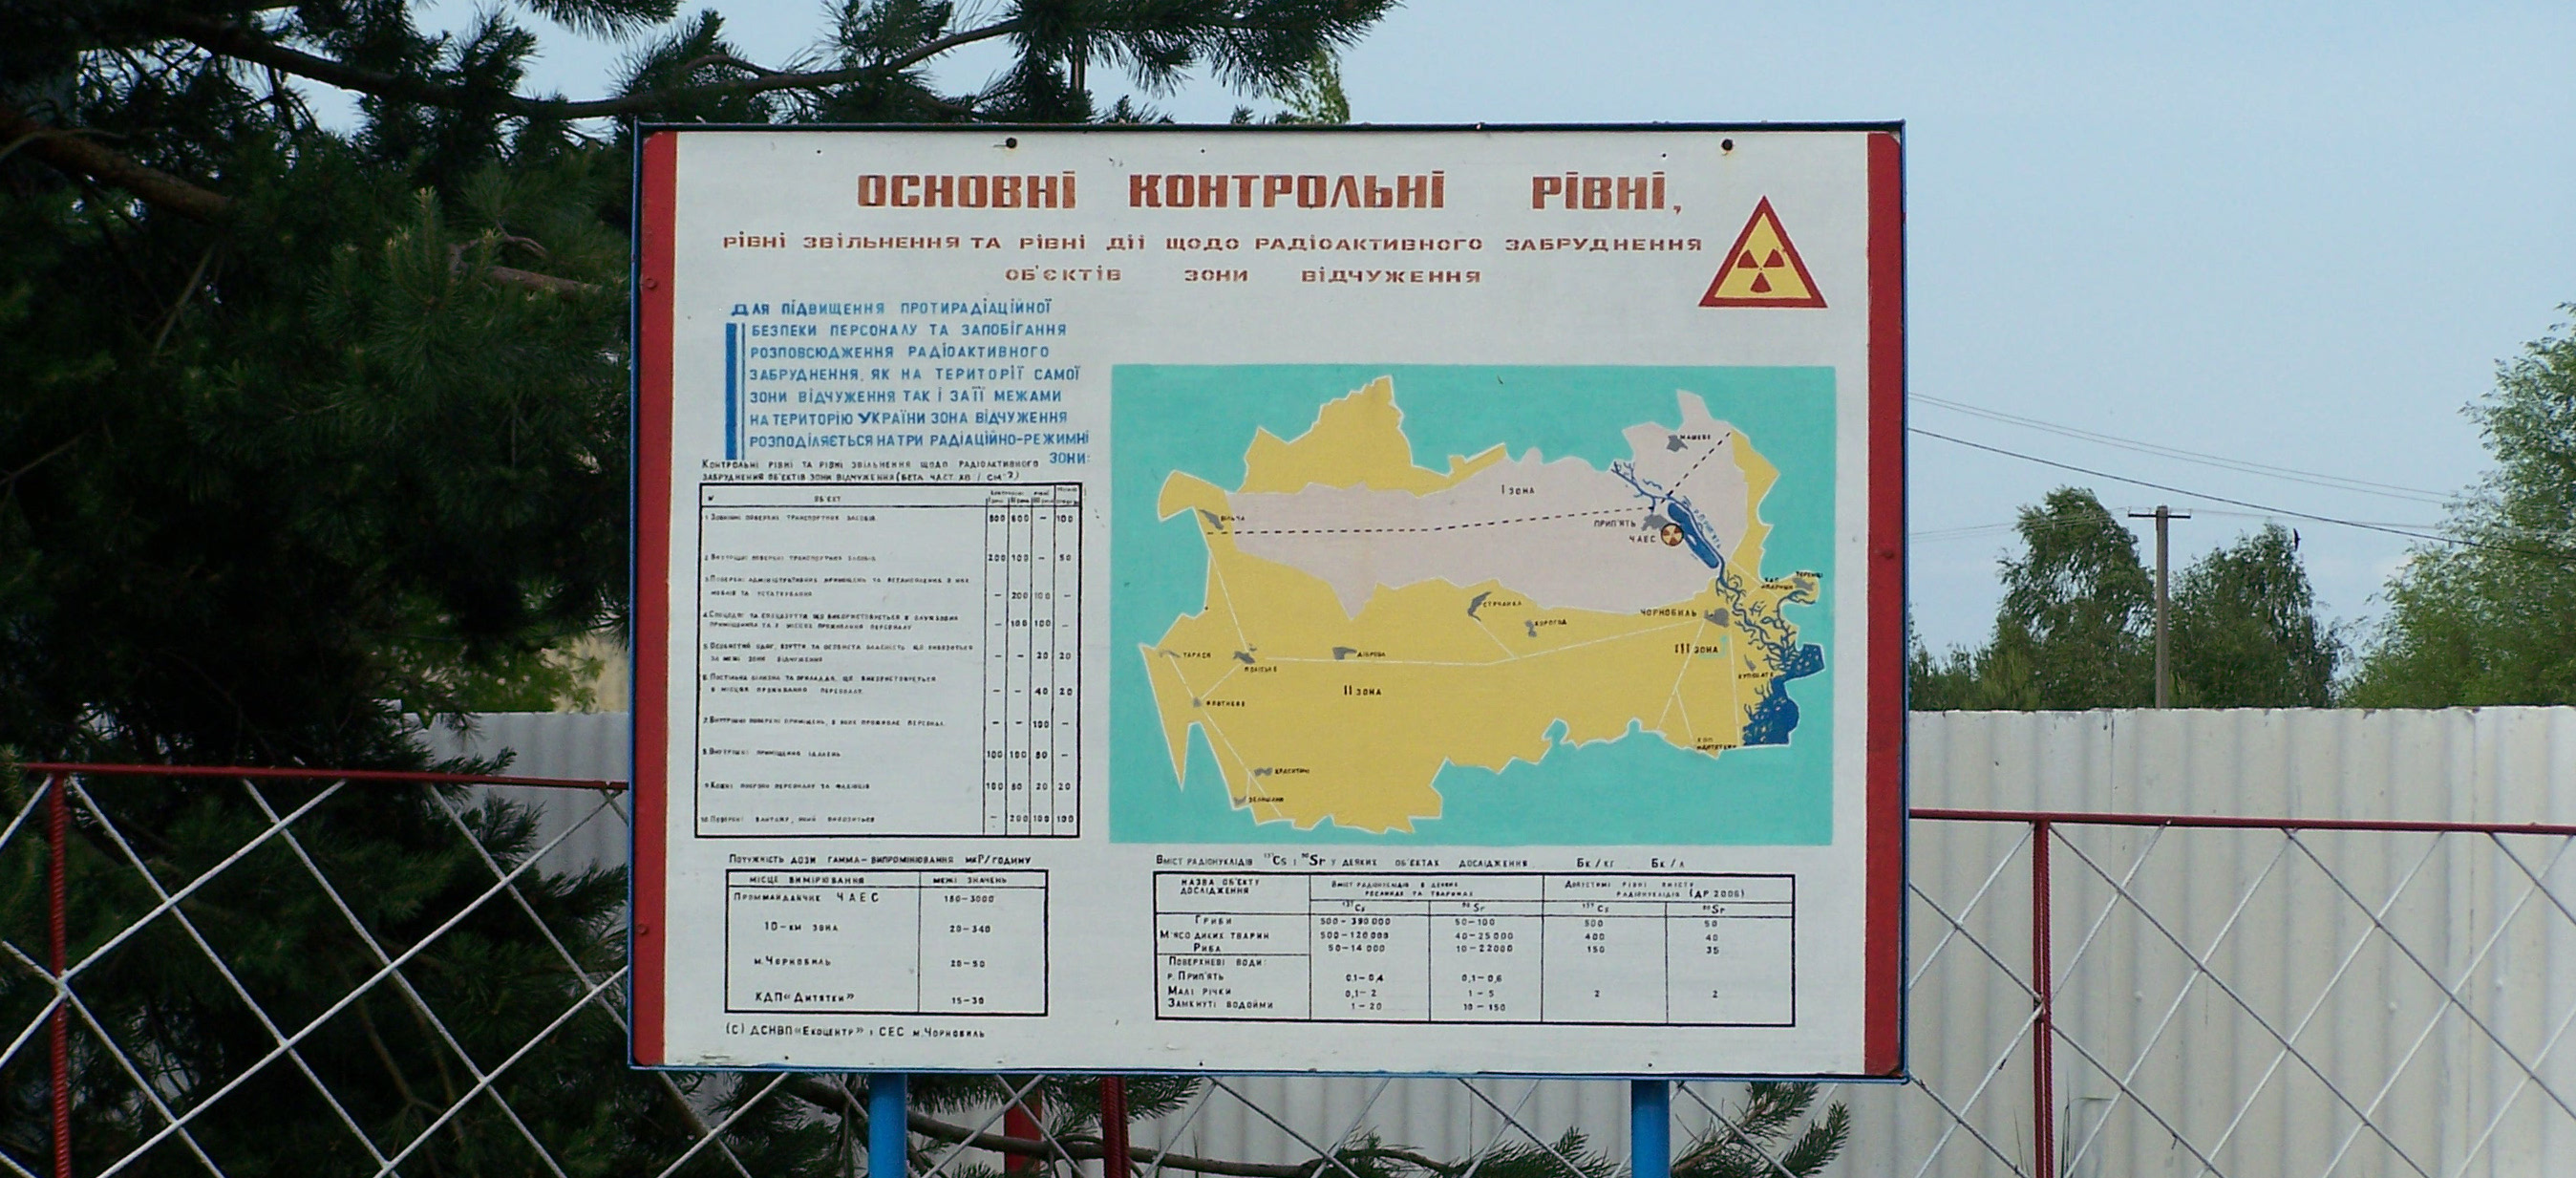 Entrance of the exclusion zone.